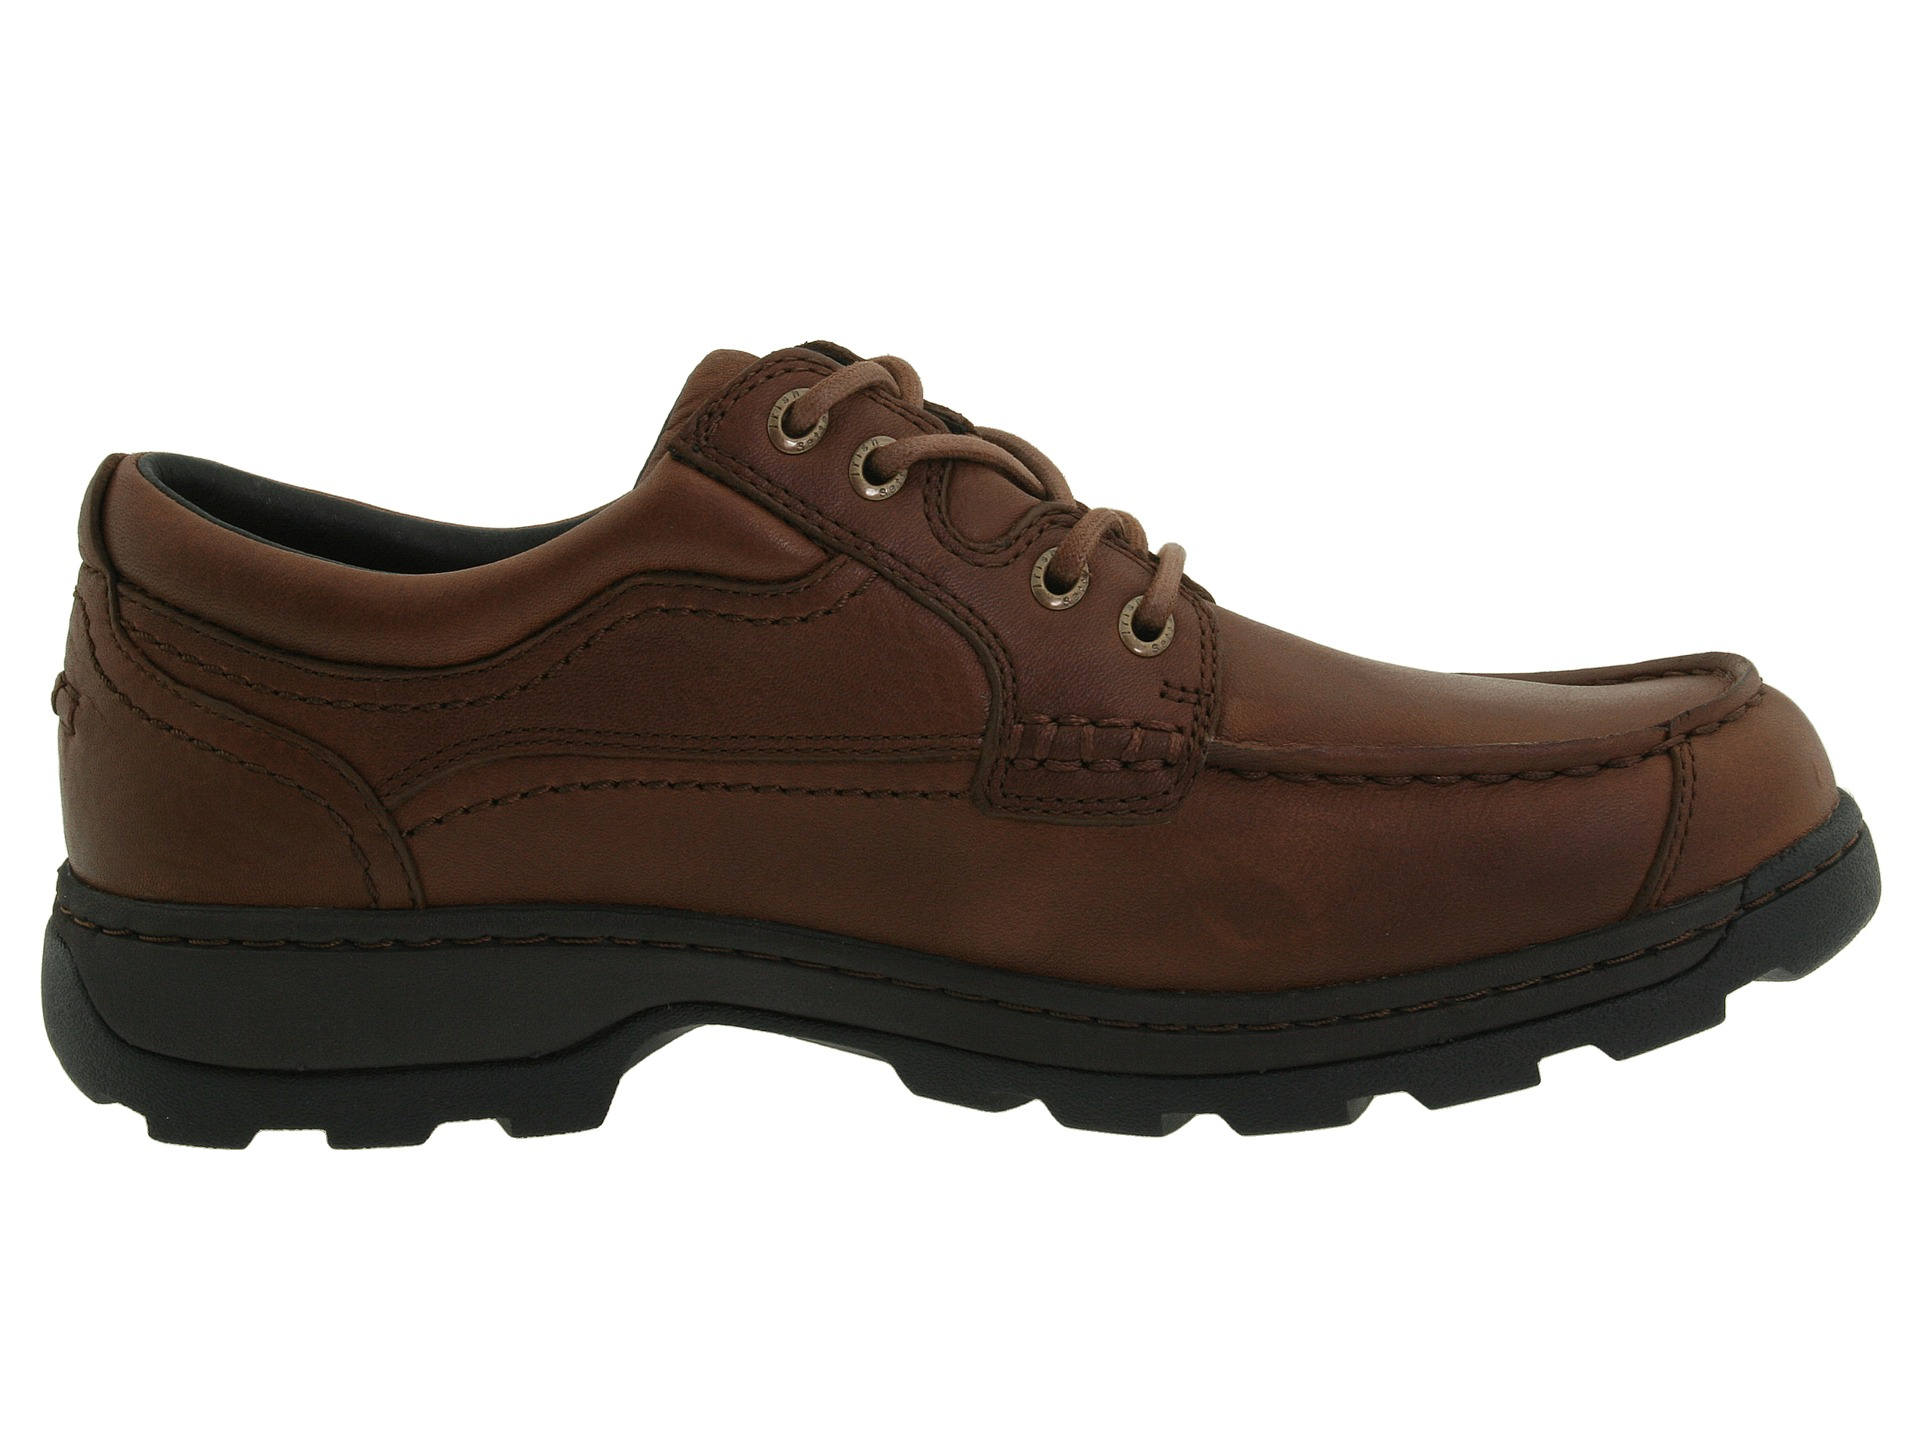 Lyst - Irish Setter Soft Paw 3872 in Brown for Men